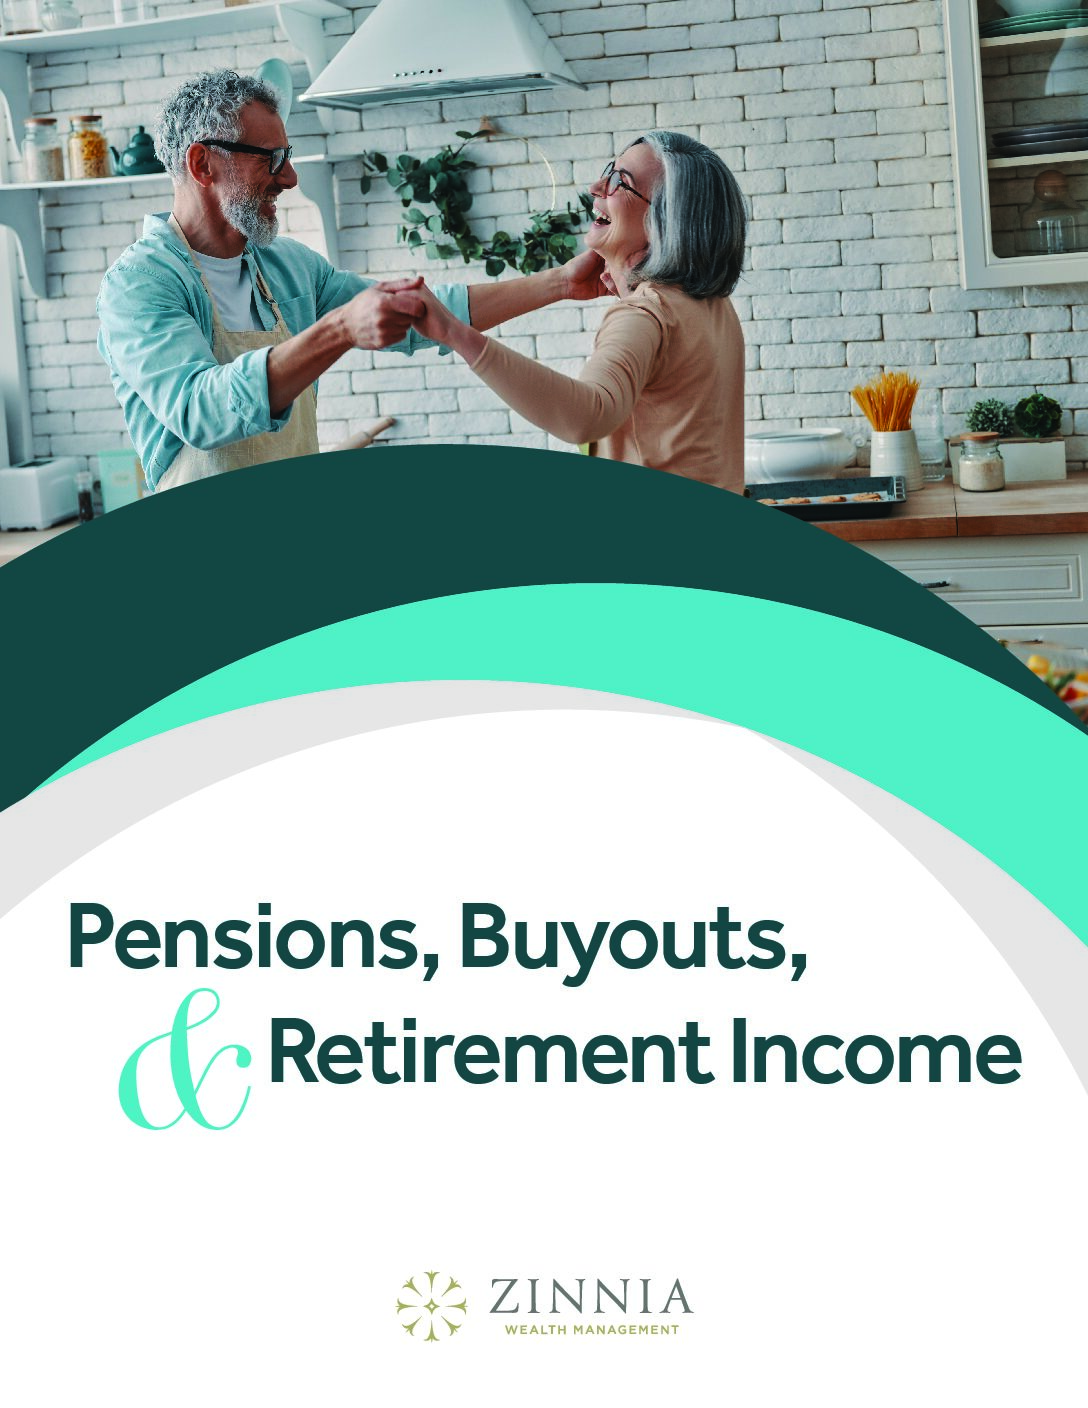 Pensions, Buyouts, & Retirement Income